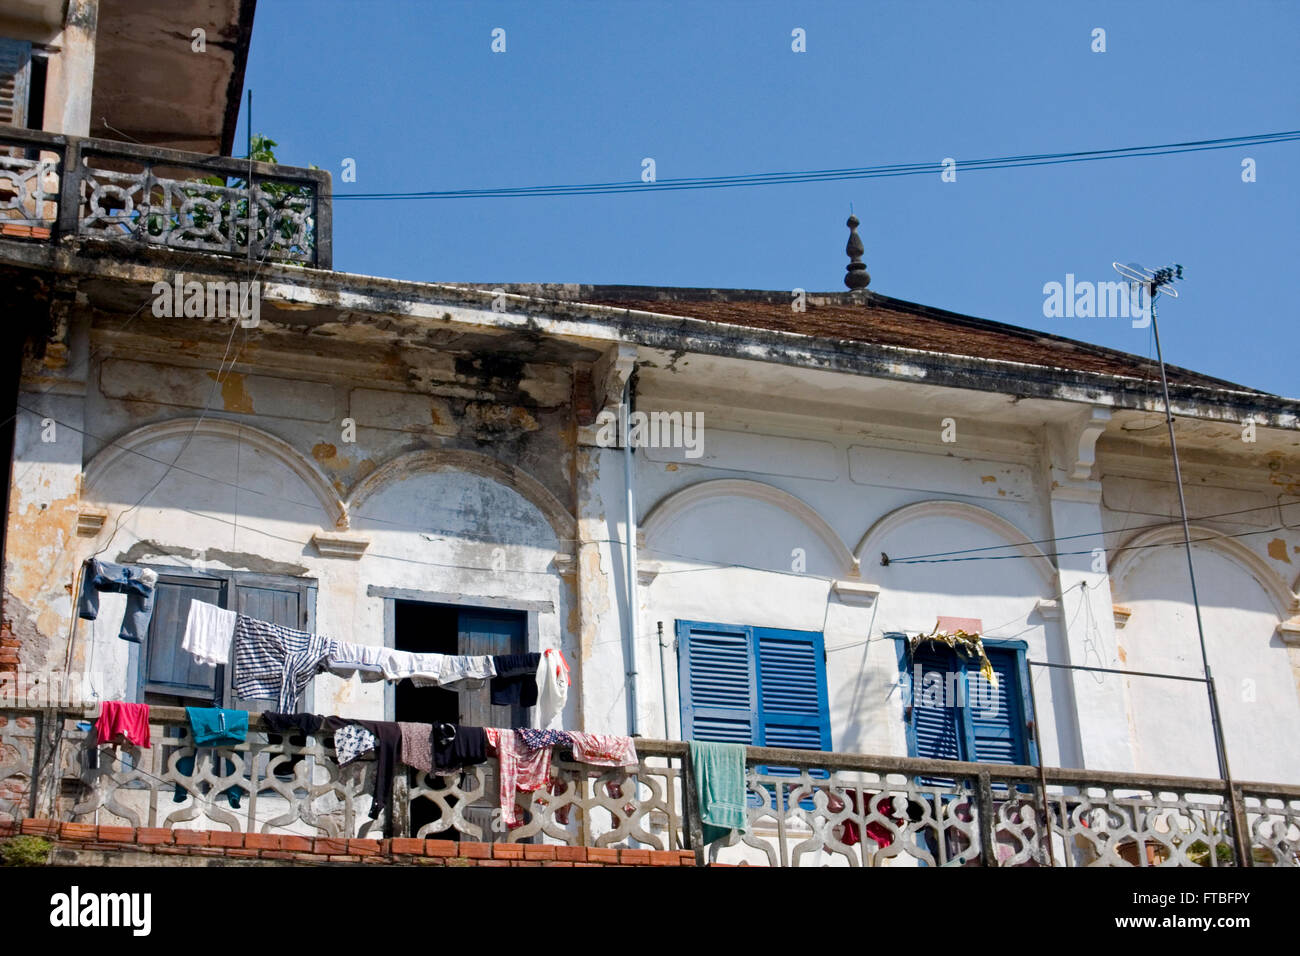 An old rundown colonial era building is part of the urban landscape in Kampong Cham, Cambodia. Stock Photo